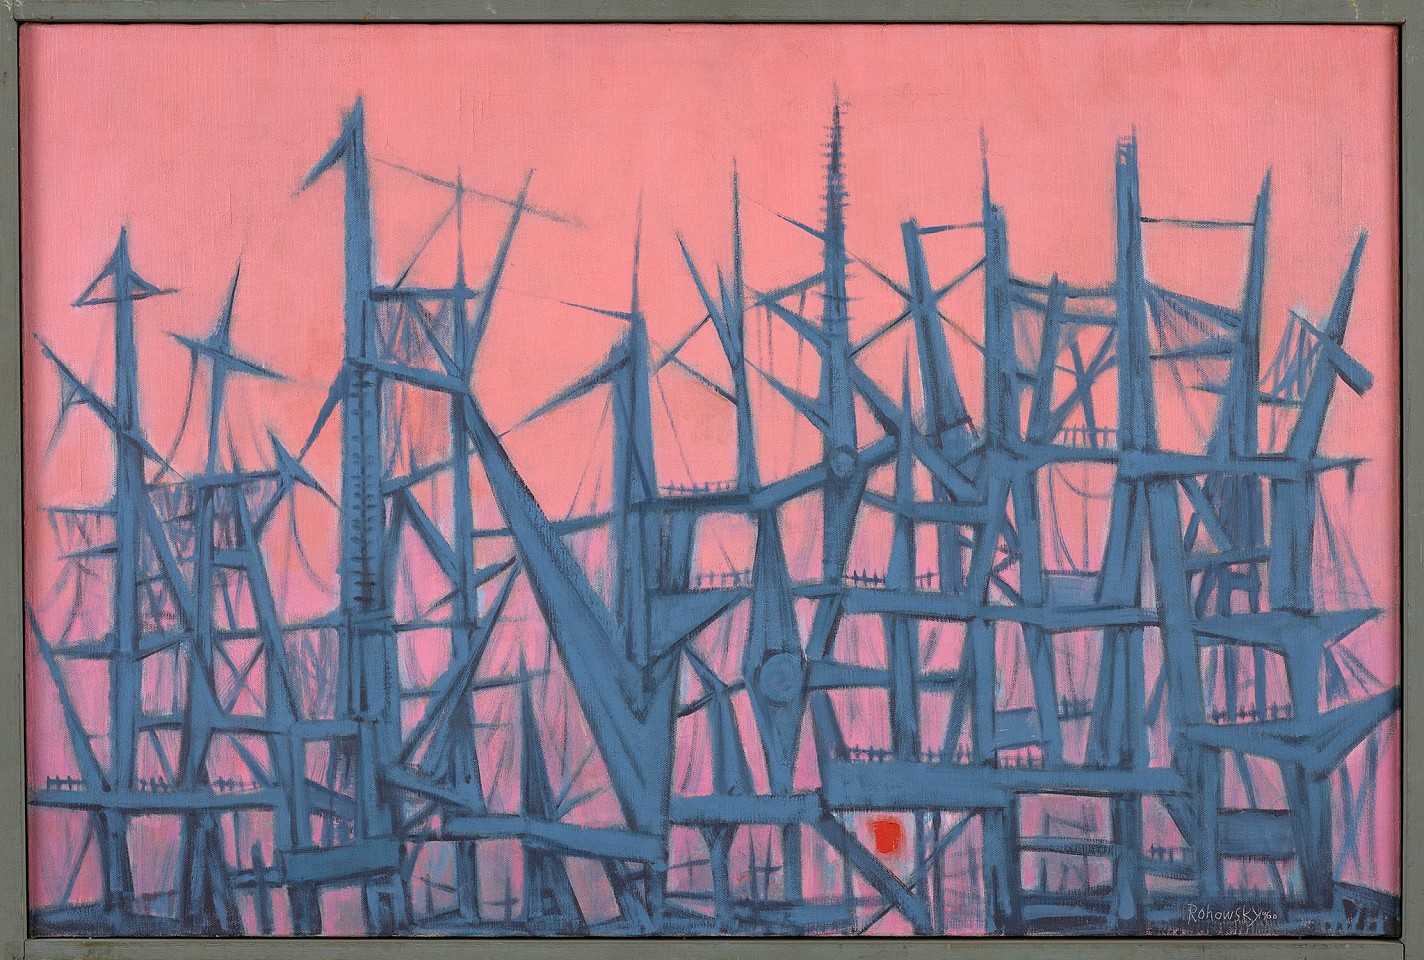 Meyers Rohowsky, NJ Structures, Sunset, c. 1960
Oil on canvas, 25 x 37 1/4 in. (63.5 x 94.6 cm)
ROH-00018